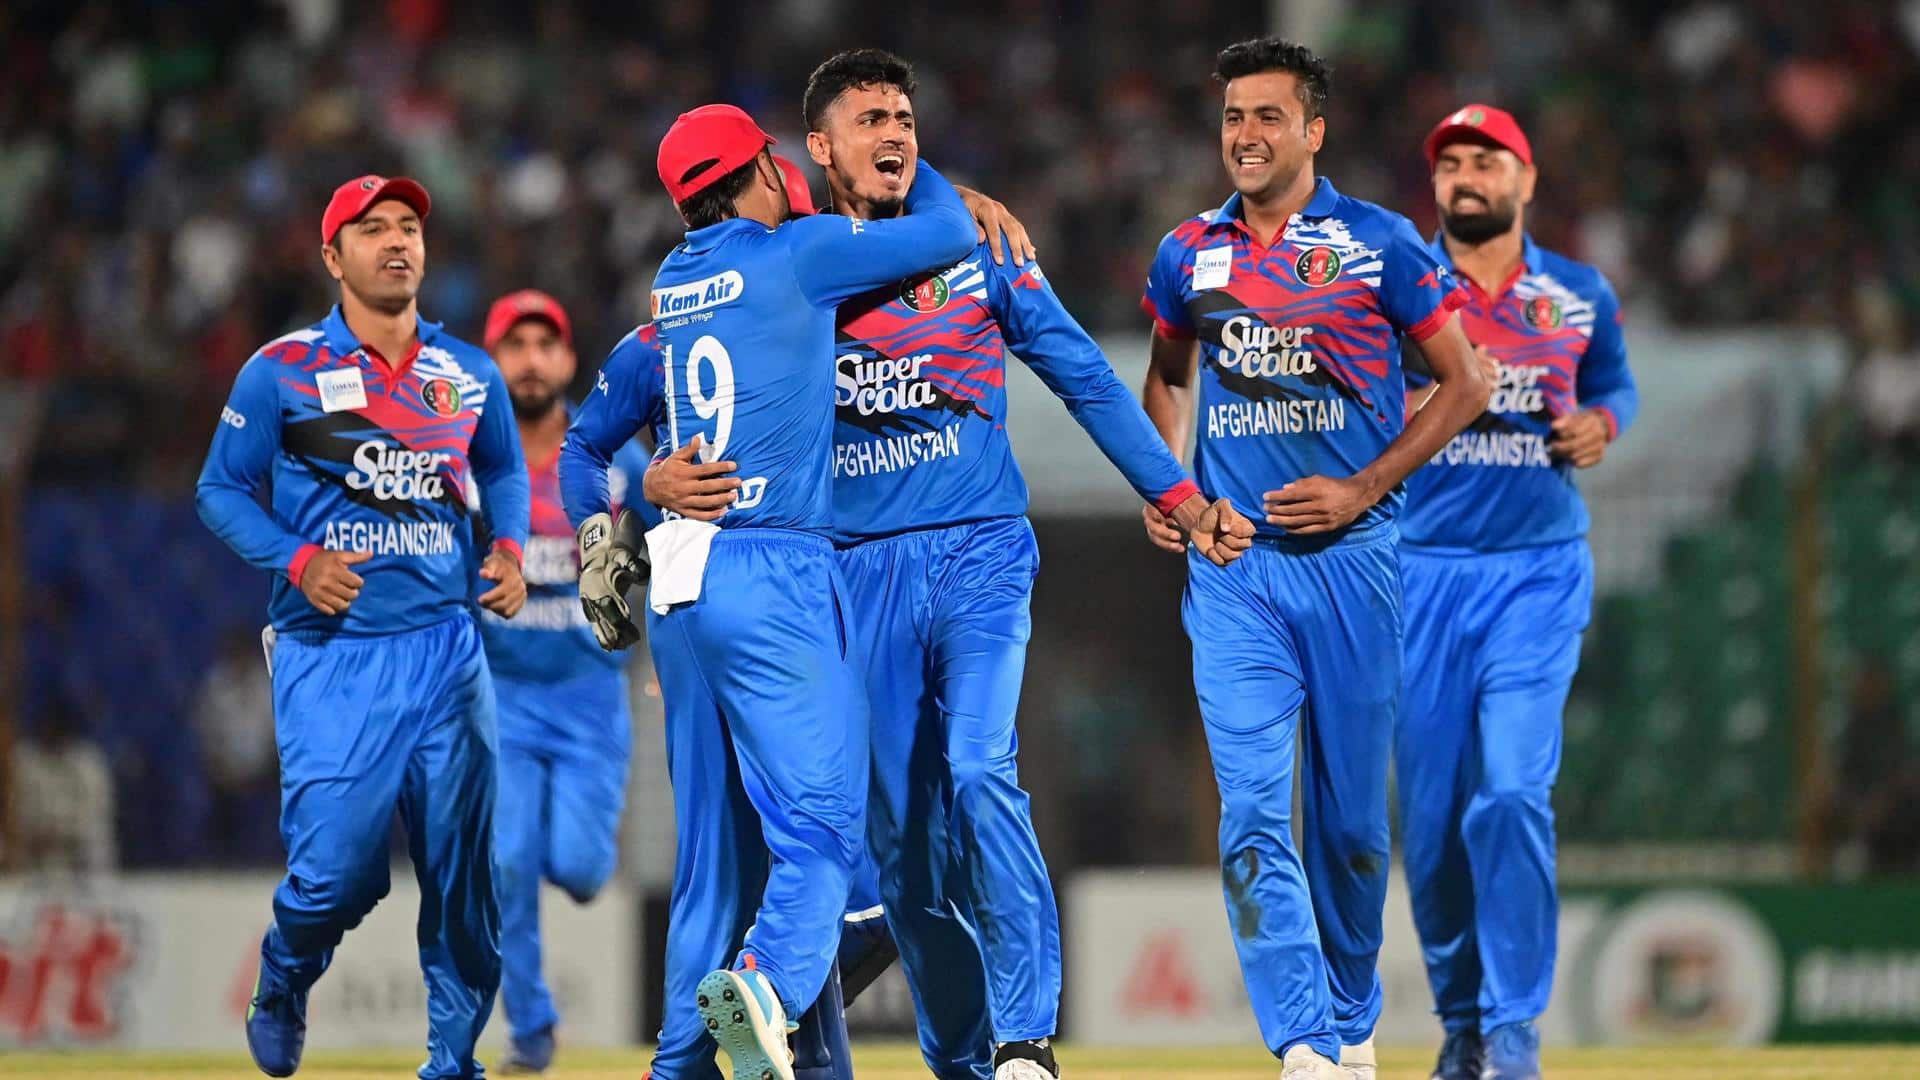 Decoding Team Afghanistan's stats in Asia Cup